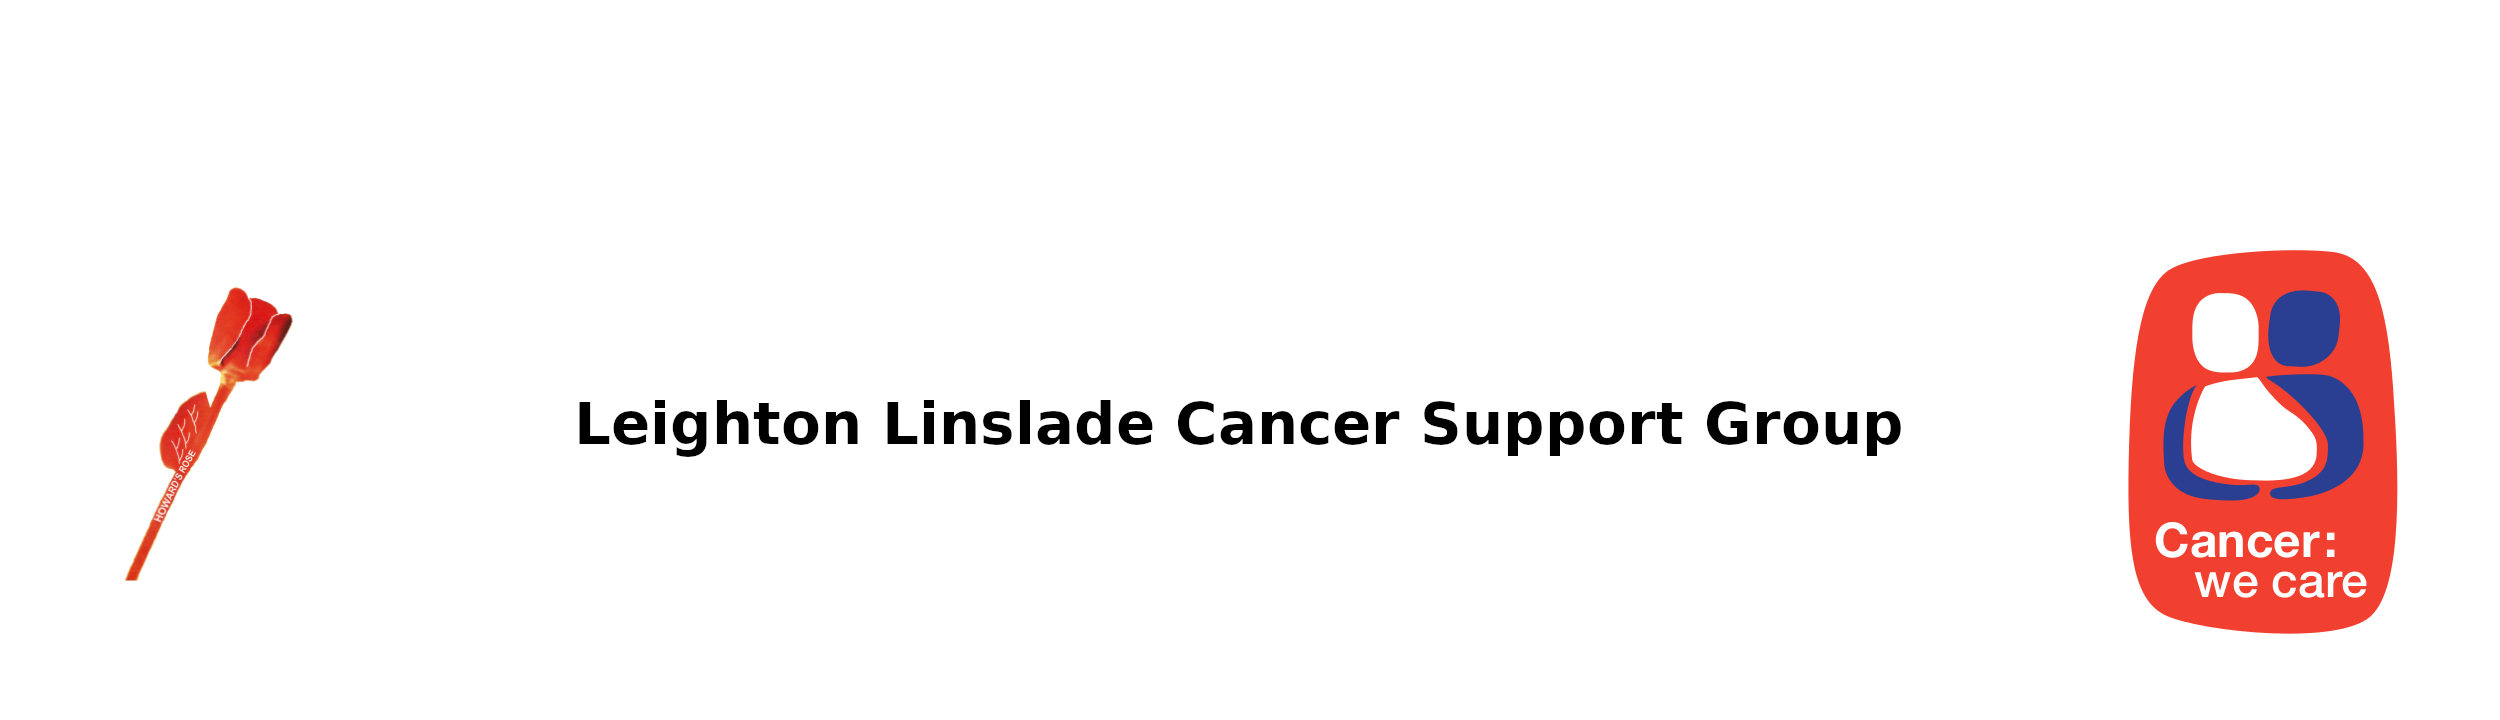 Leighton Linslade Cancer Support Group